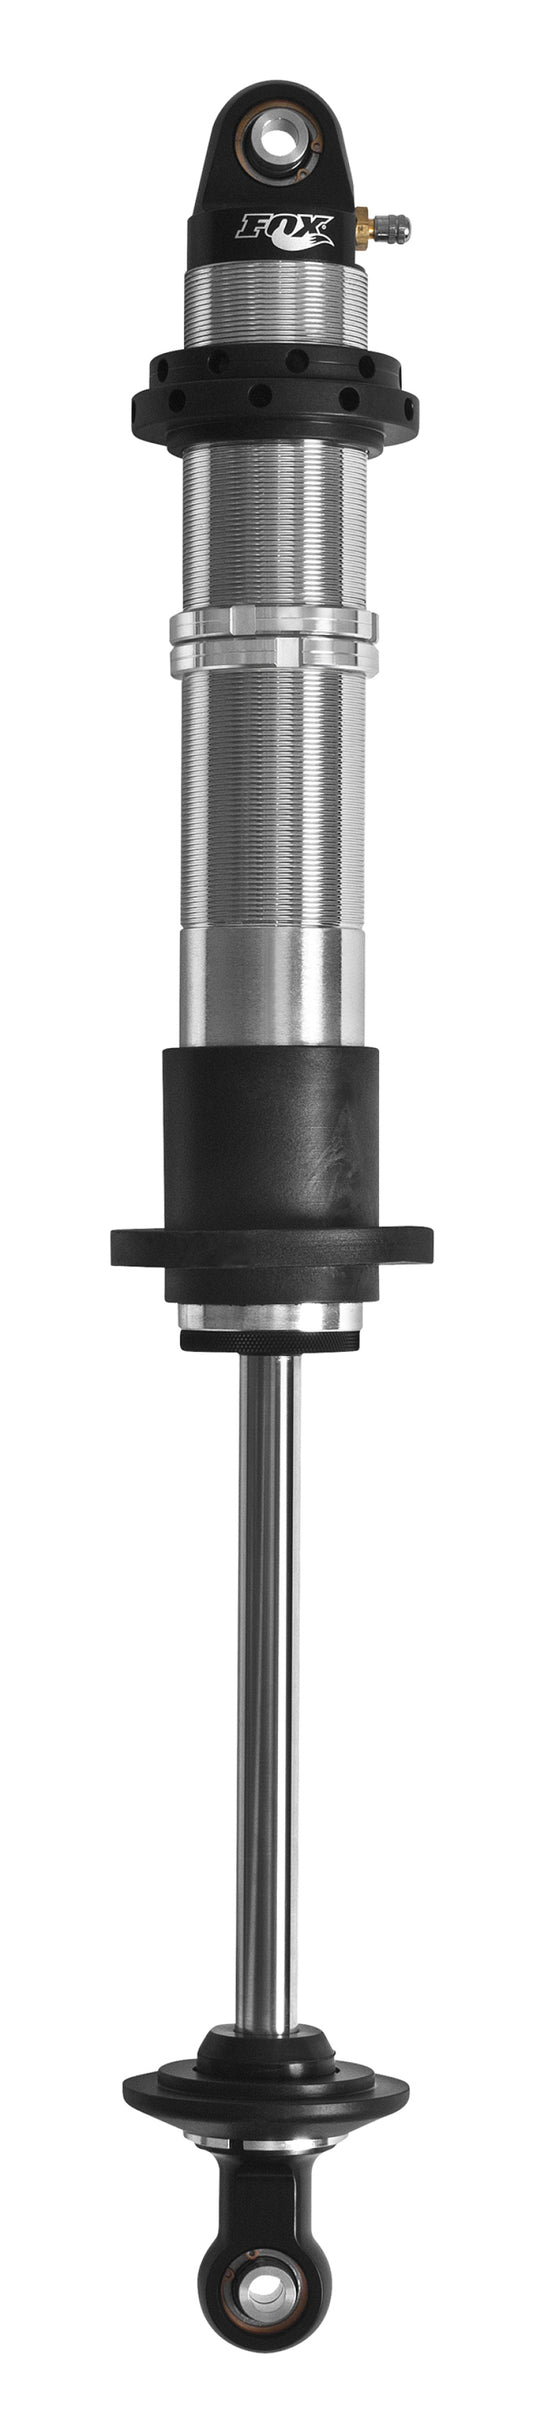 Fox 2.5 Factory Series 14in. Emulsion Coilover Shock 7/8in. Shaft (Normal Valving) 50/70 - Blk